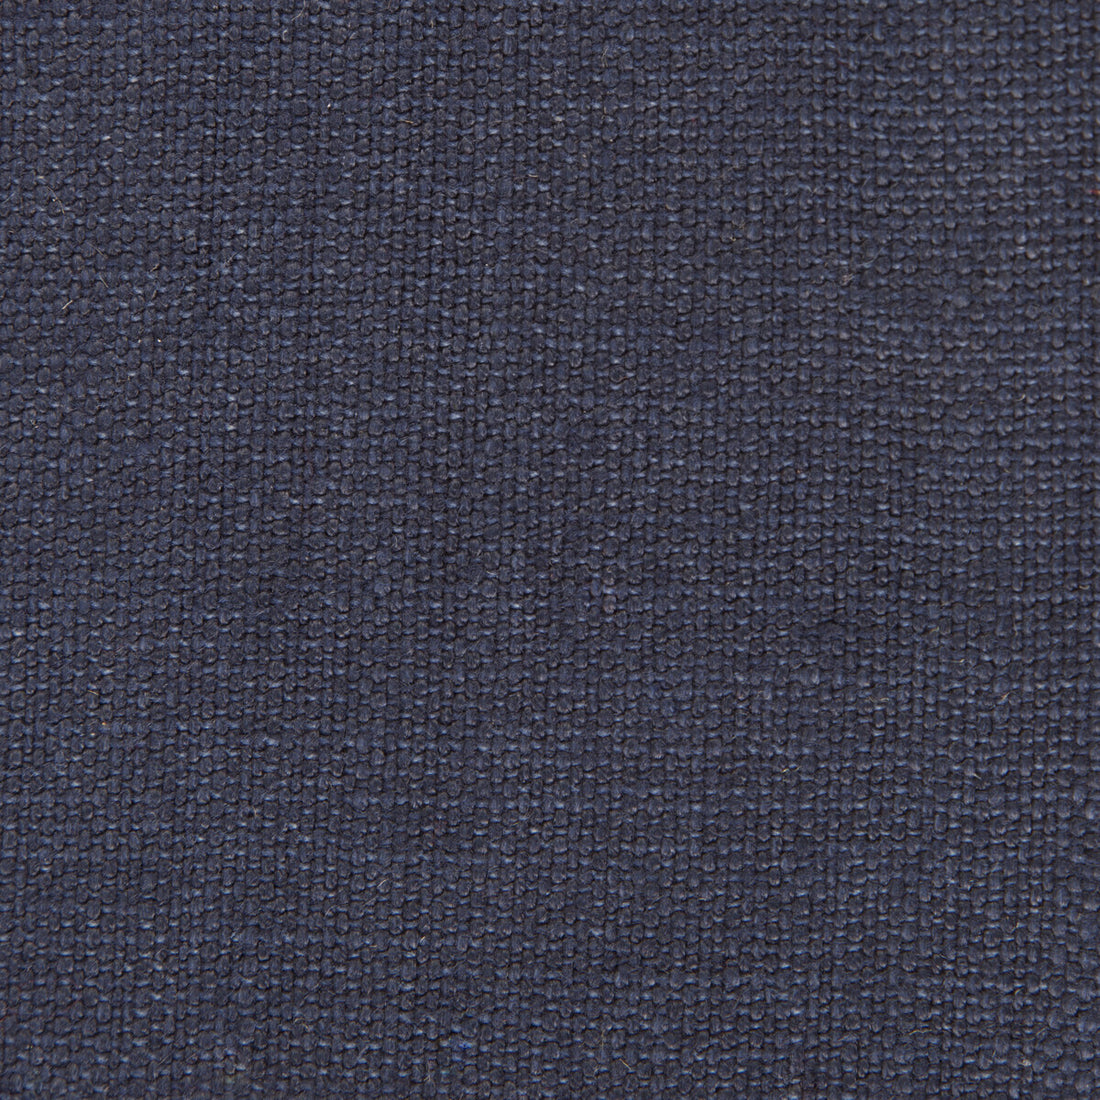 Nicaragua fabric in azul oscuro color - pattern GDT5239.015.0 - by Gaston y Daniela in the Basics collection